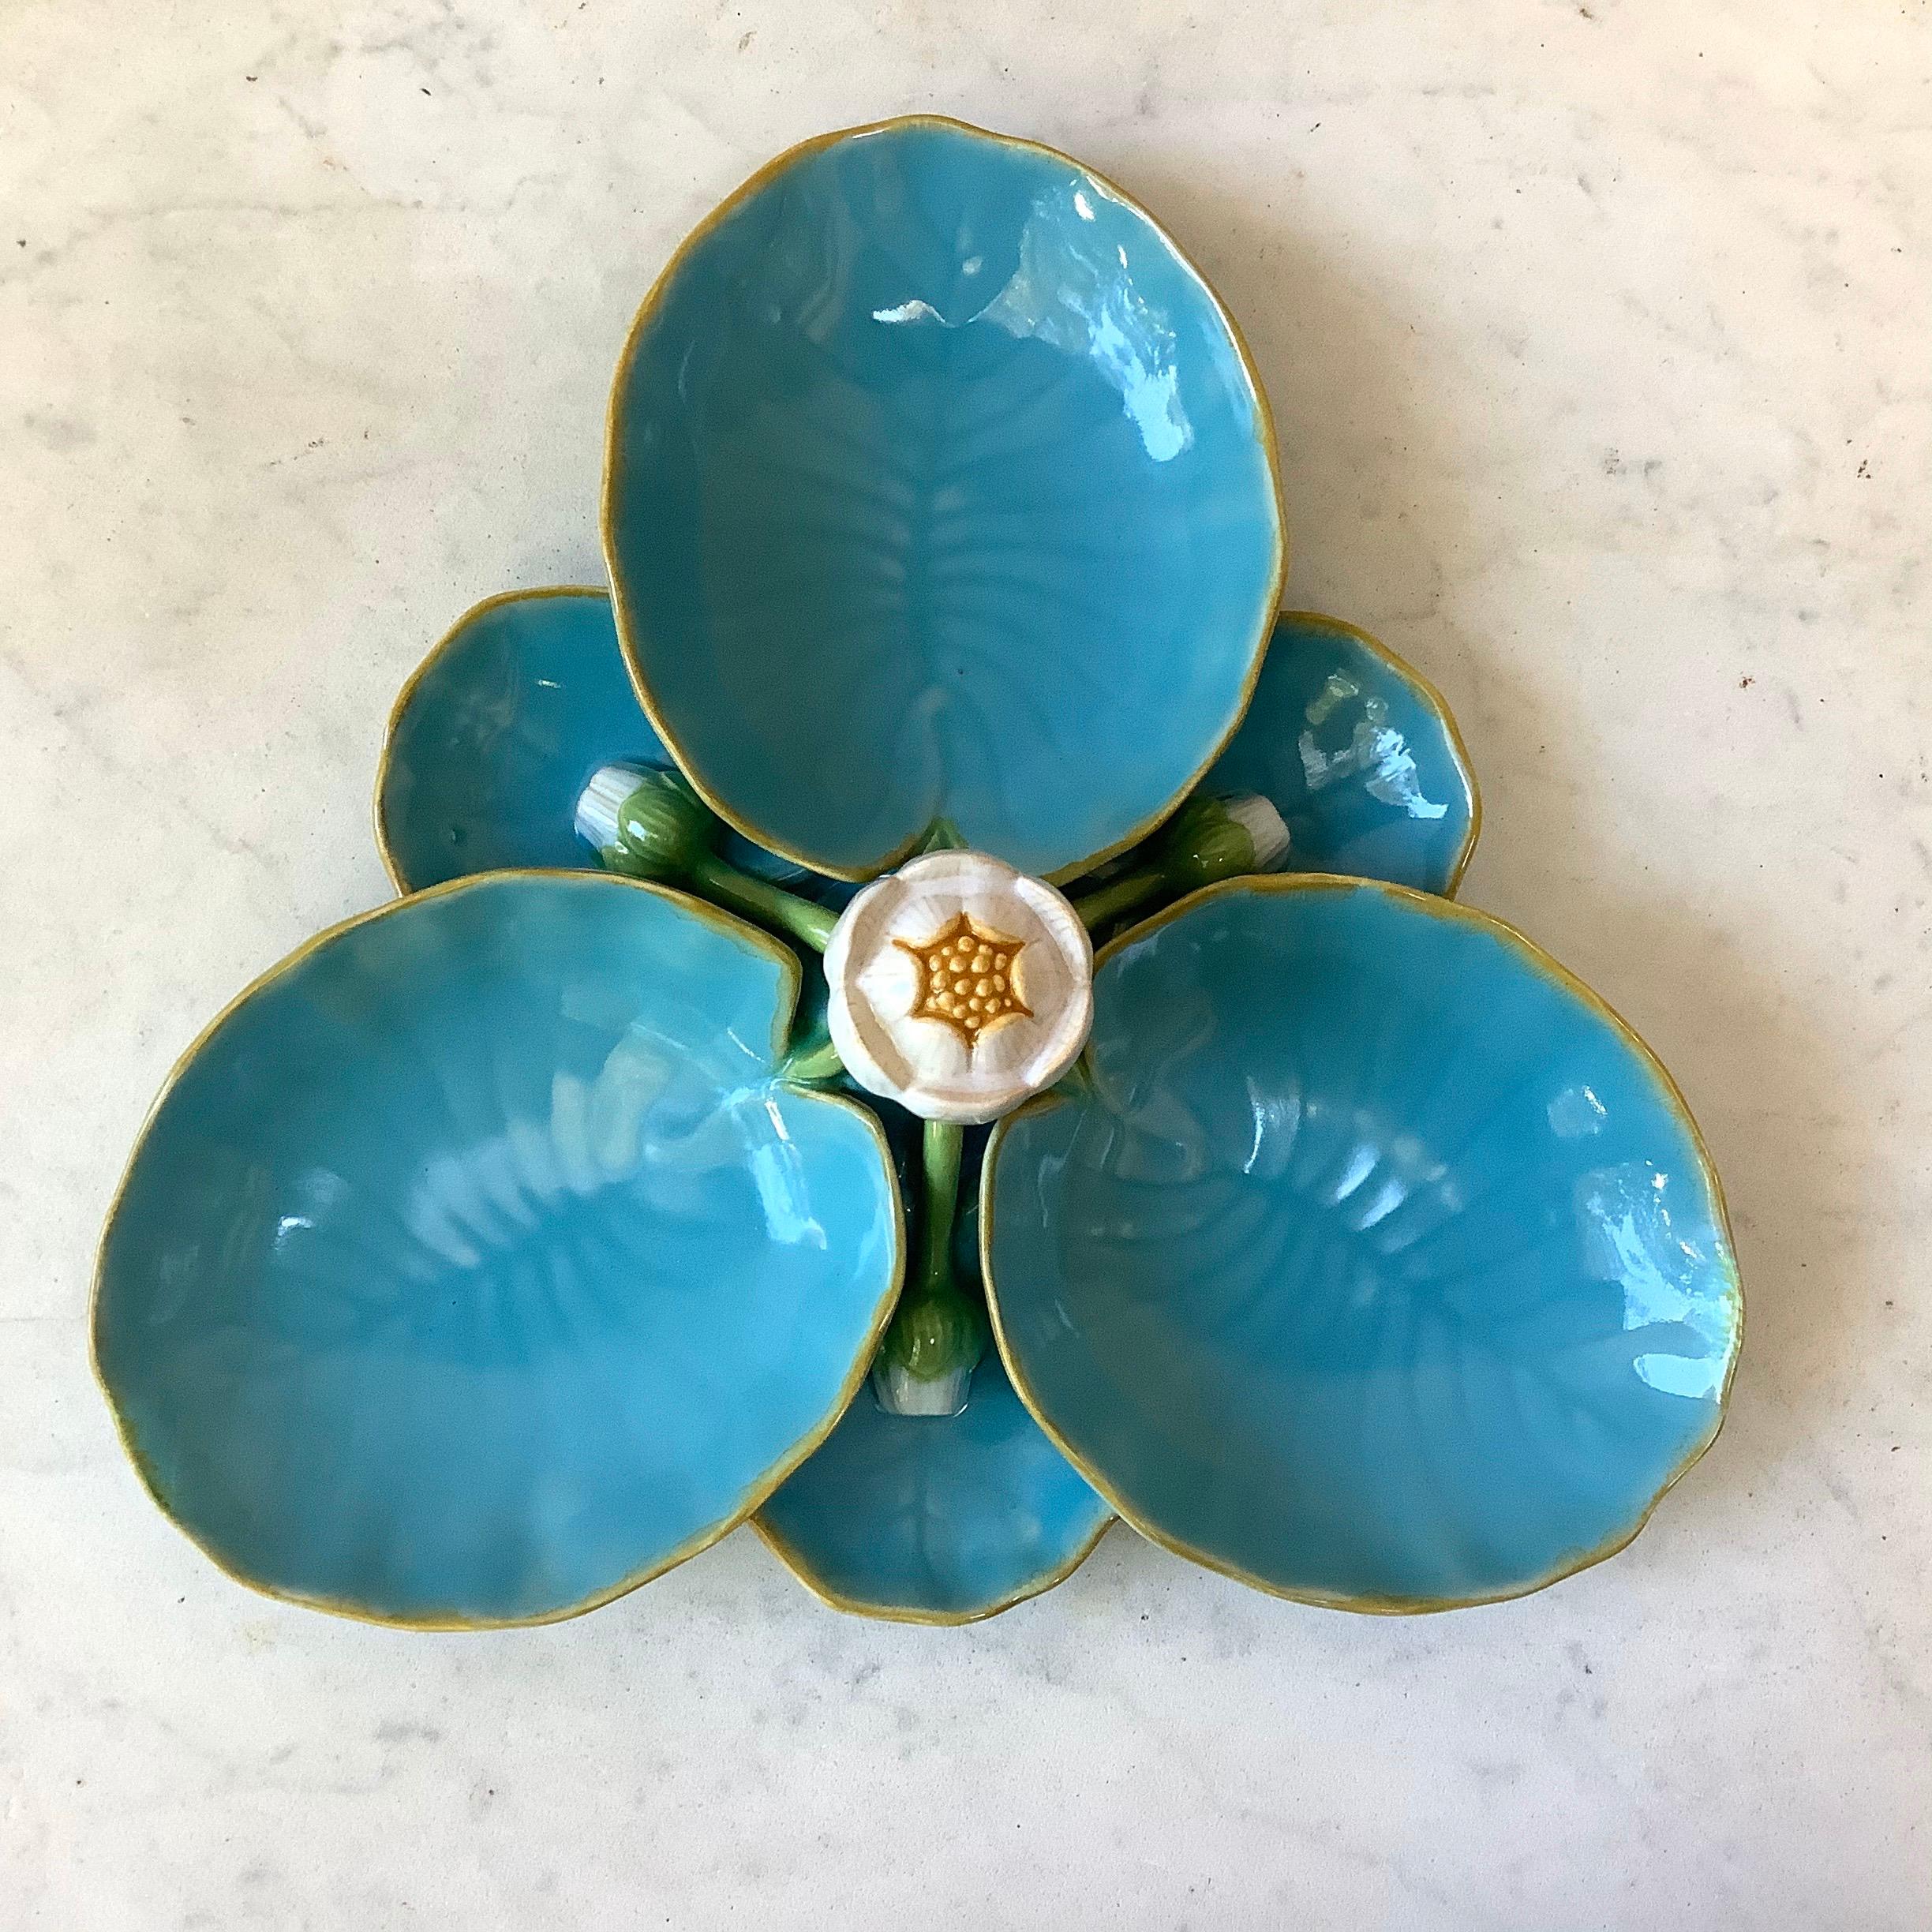 English Victorian Majolica signed Minton ‘Lily Pad’ Serving Dish circa 1875 modelled as three large conjoined lily pad bowls separated by three smaller lily bowls all with buds, the central handle formed as a lily flower.
Rare aqua color.
 